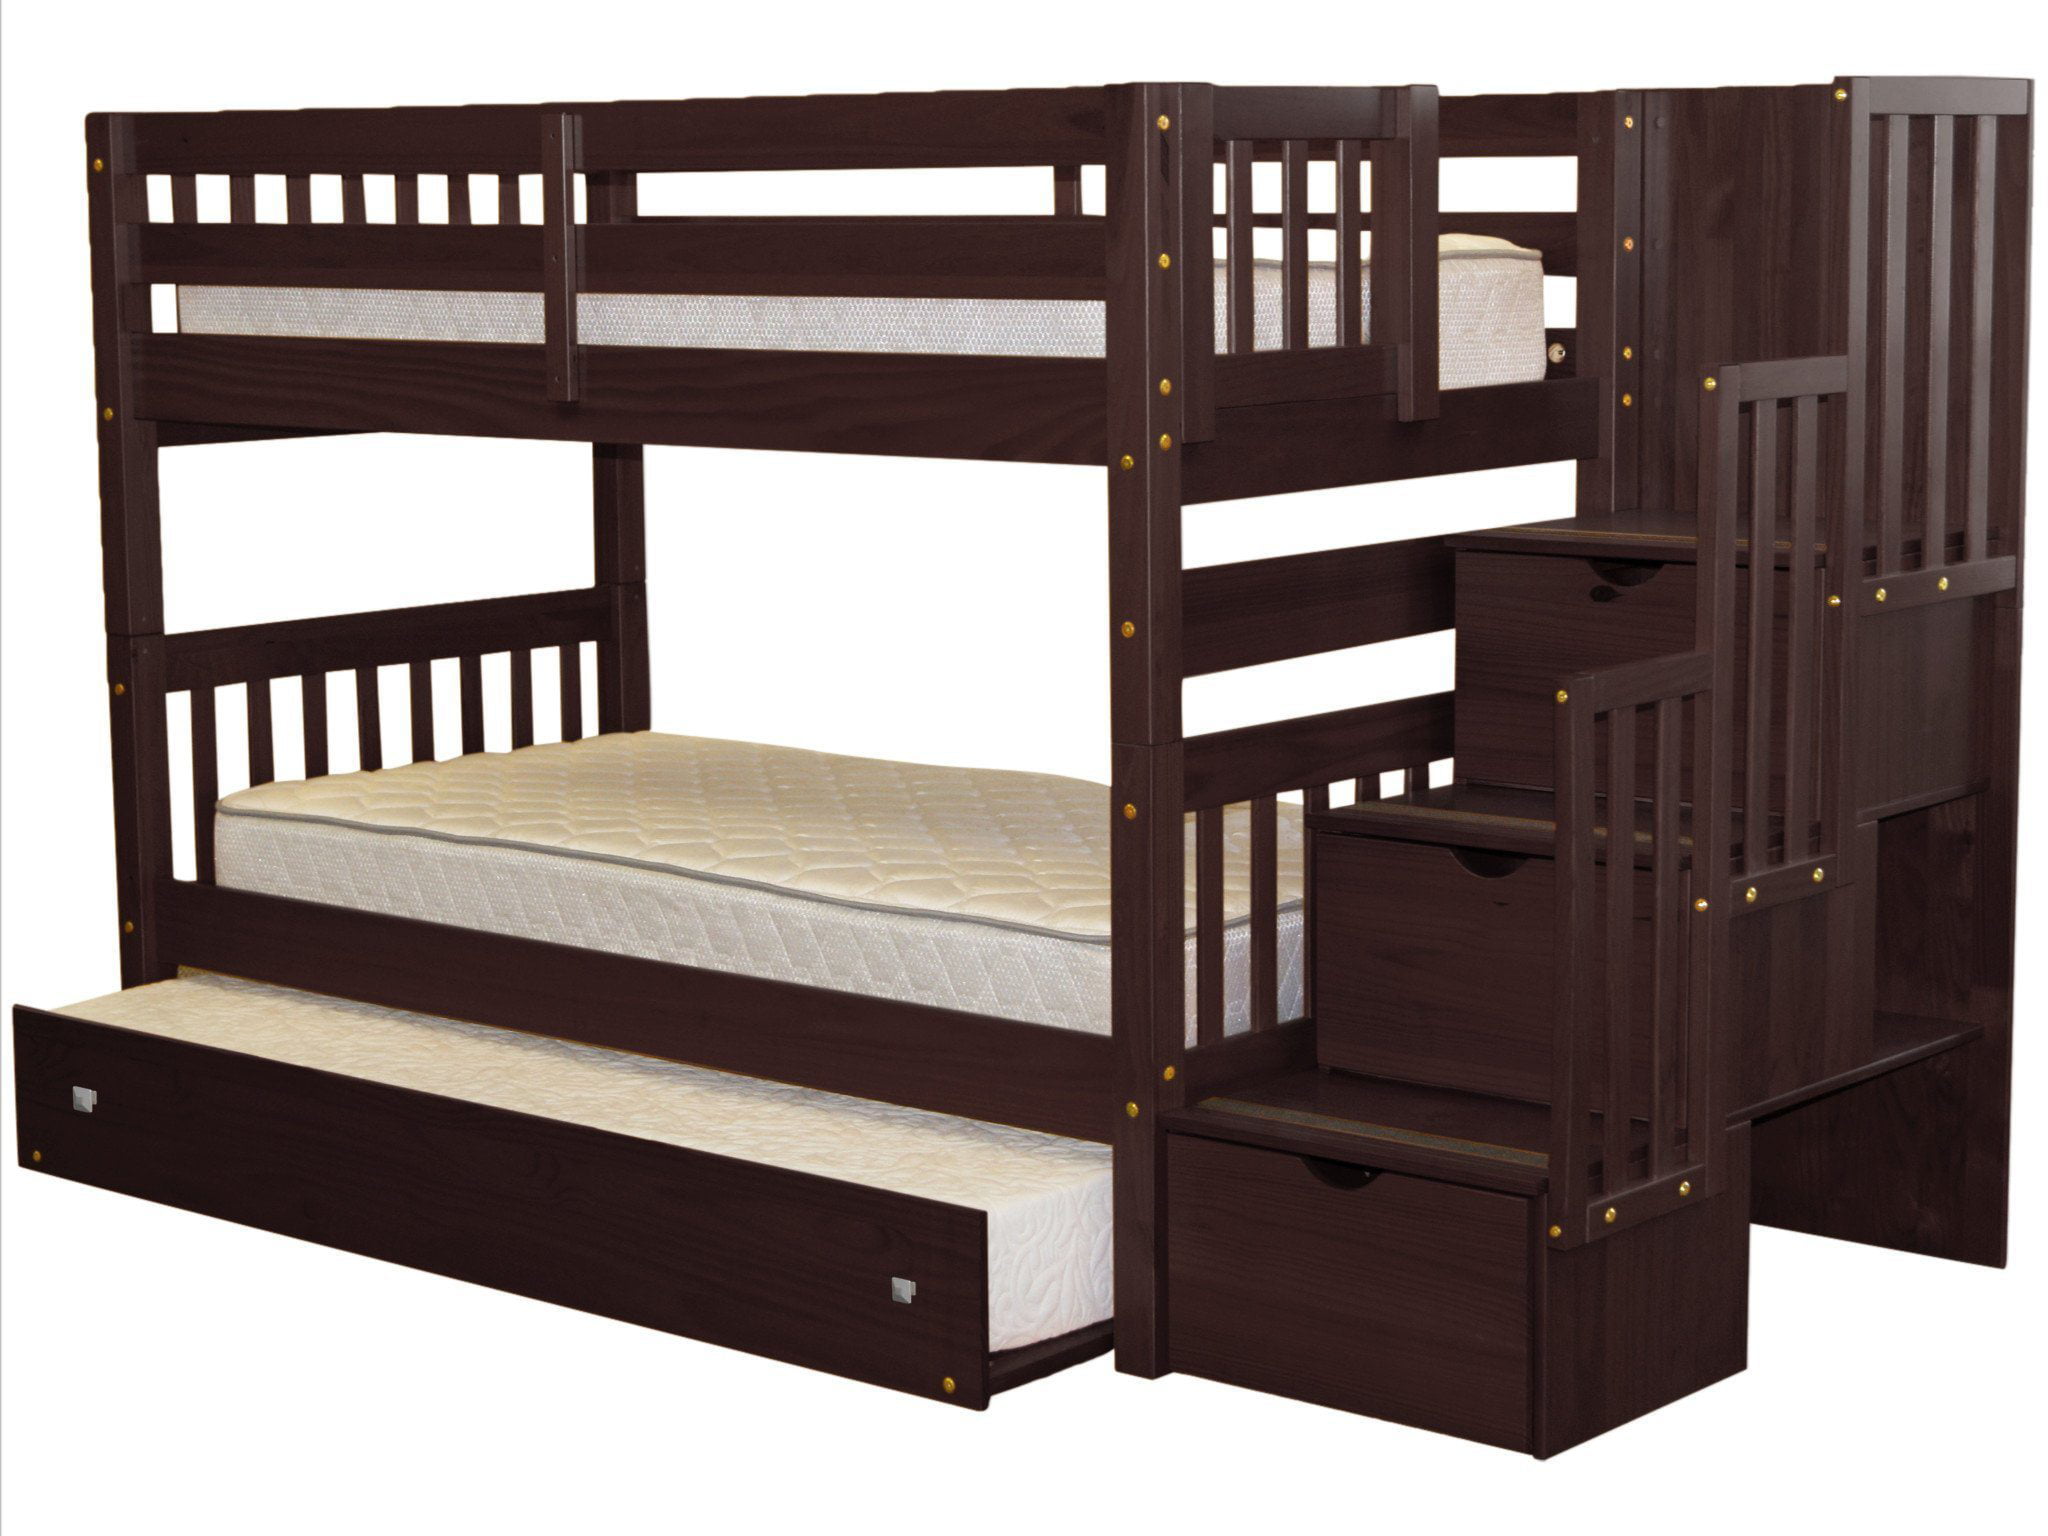 Bedz King Stairway Bunk Beds Twin Over Twin With 3 Drawers In The